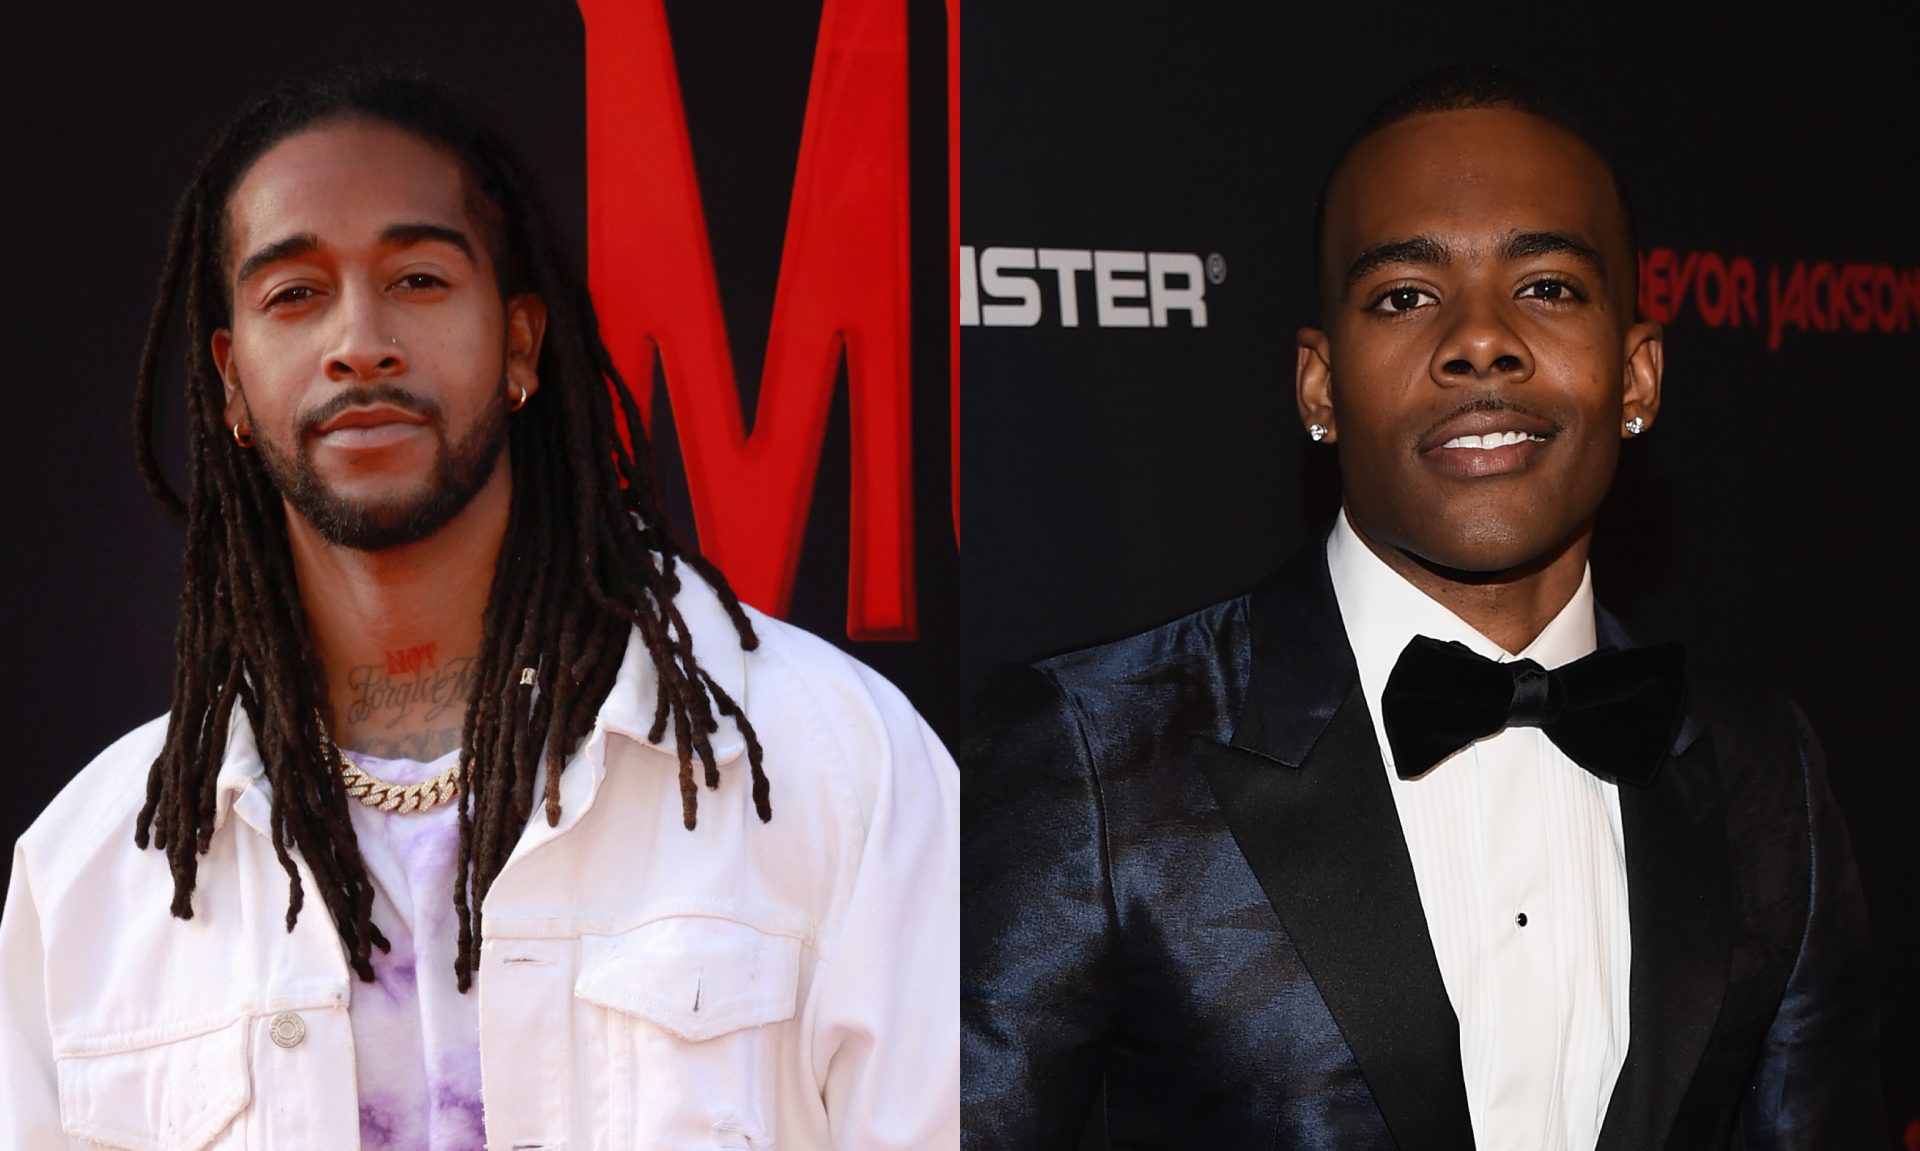 Omarion And Mario Scheduled For Hit-For-Hit Music Battle Along With Guests Ray J, Bobby V, Pleasure P & Sammie